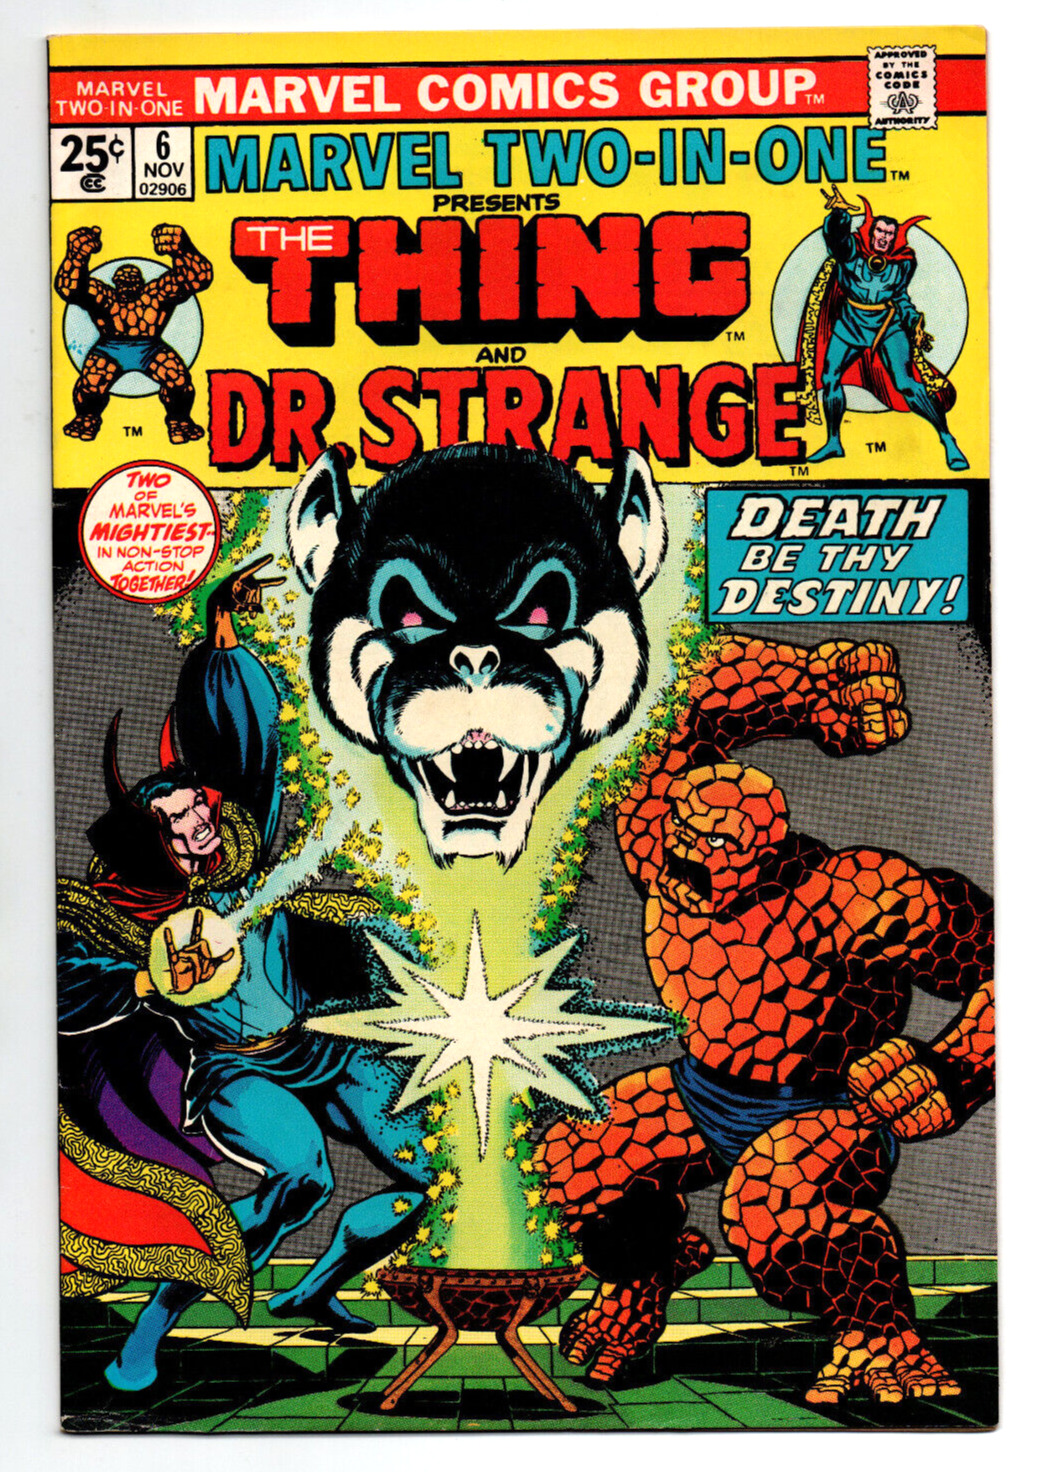 Marvel Two-In-One #6 - Thing - Doctor Strange - 1974 - VF